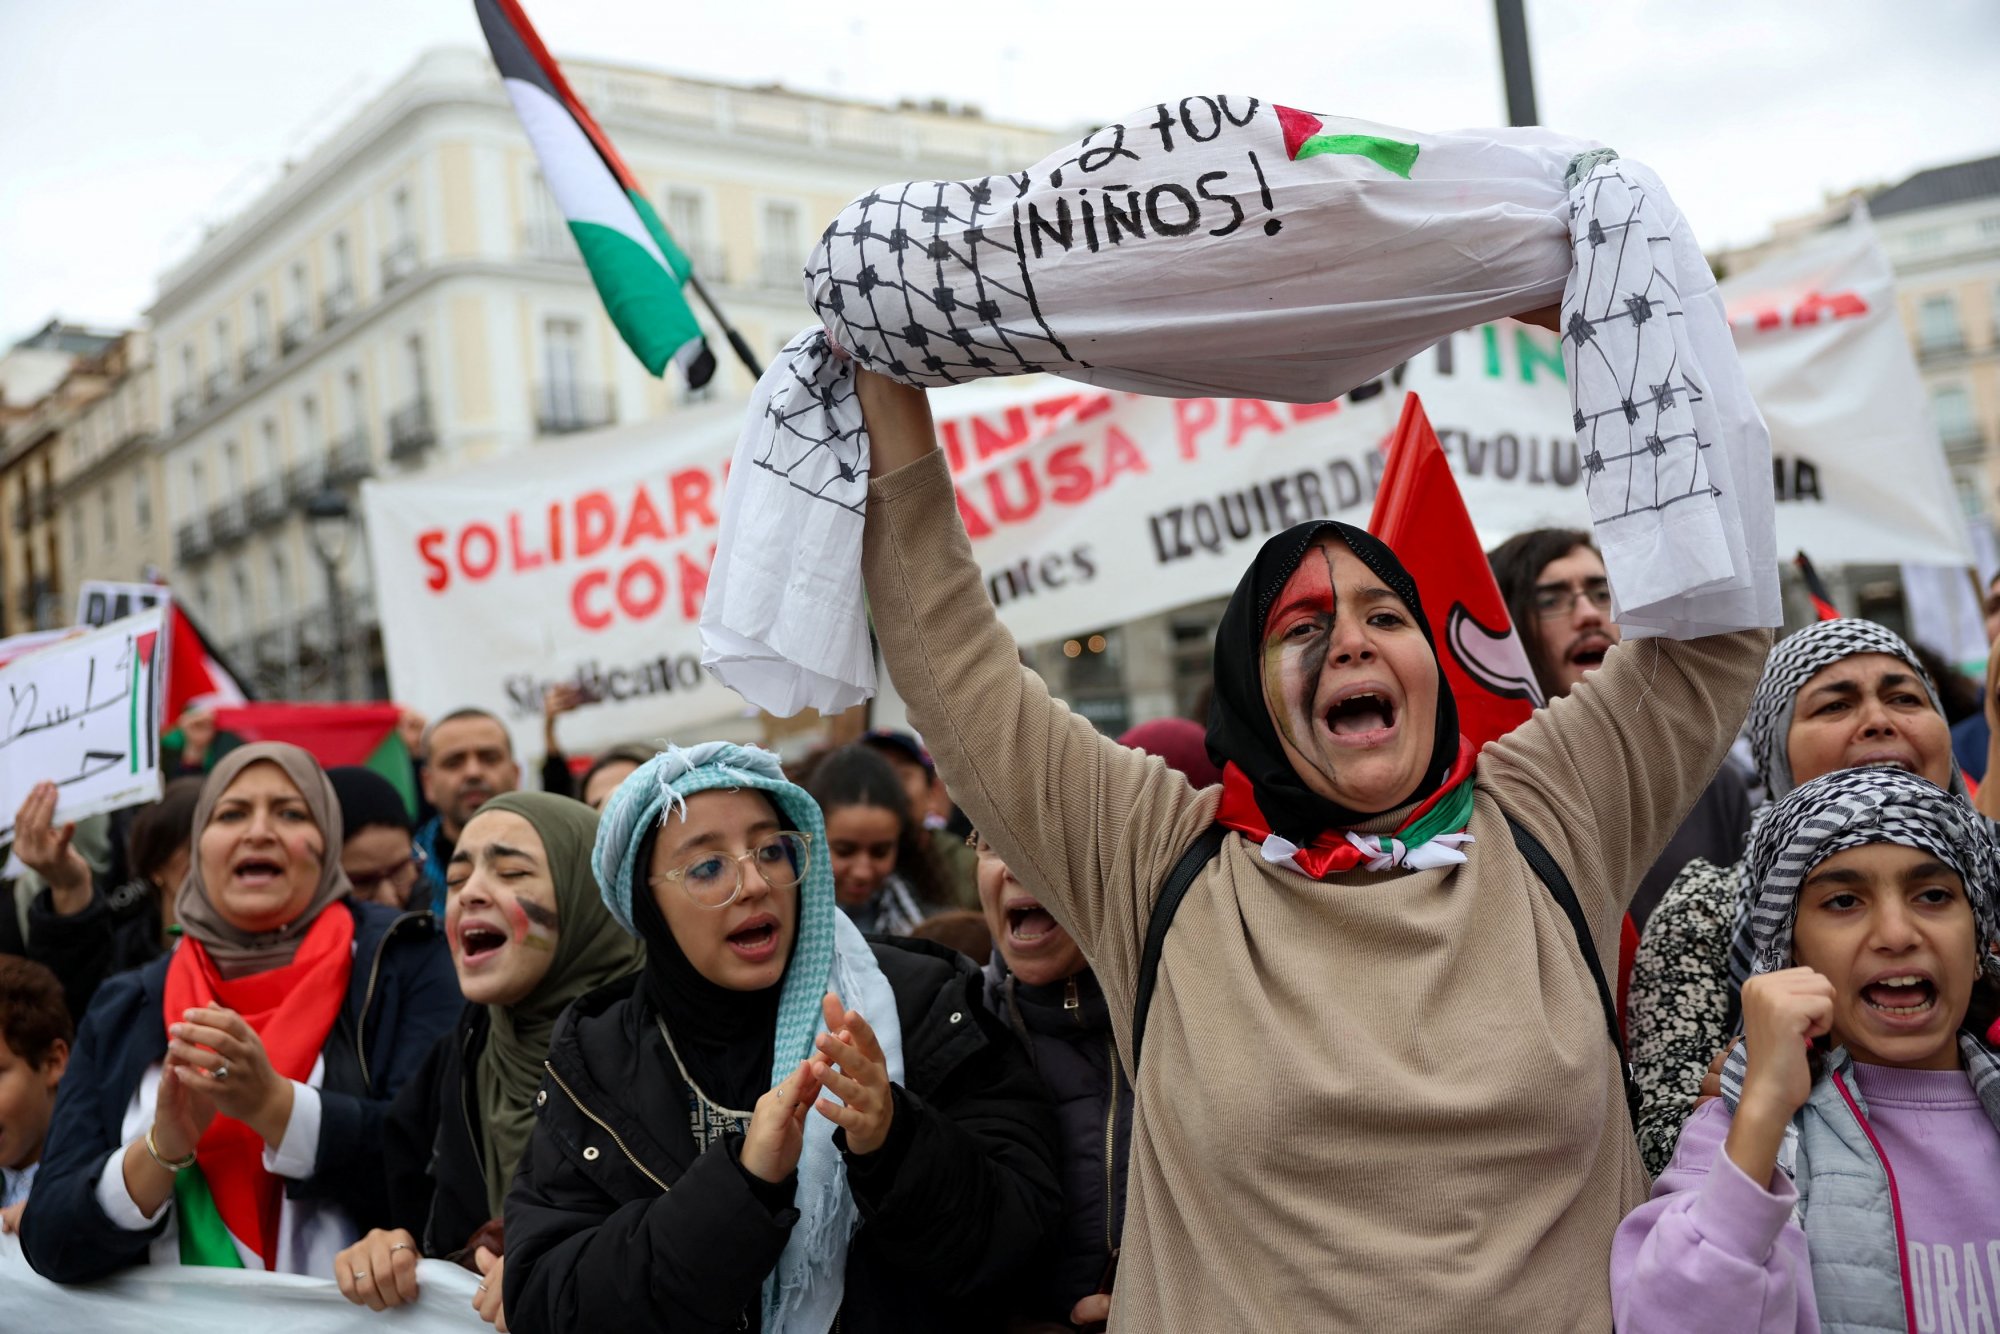 2023 10 29T134656Z 440423485 RC2D24A3M329 RTRMADP 5 ISRAEL PALESTINIANS PROTESTS SPAIN 1.jpg